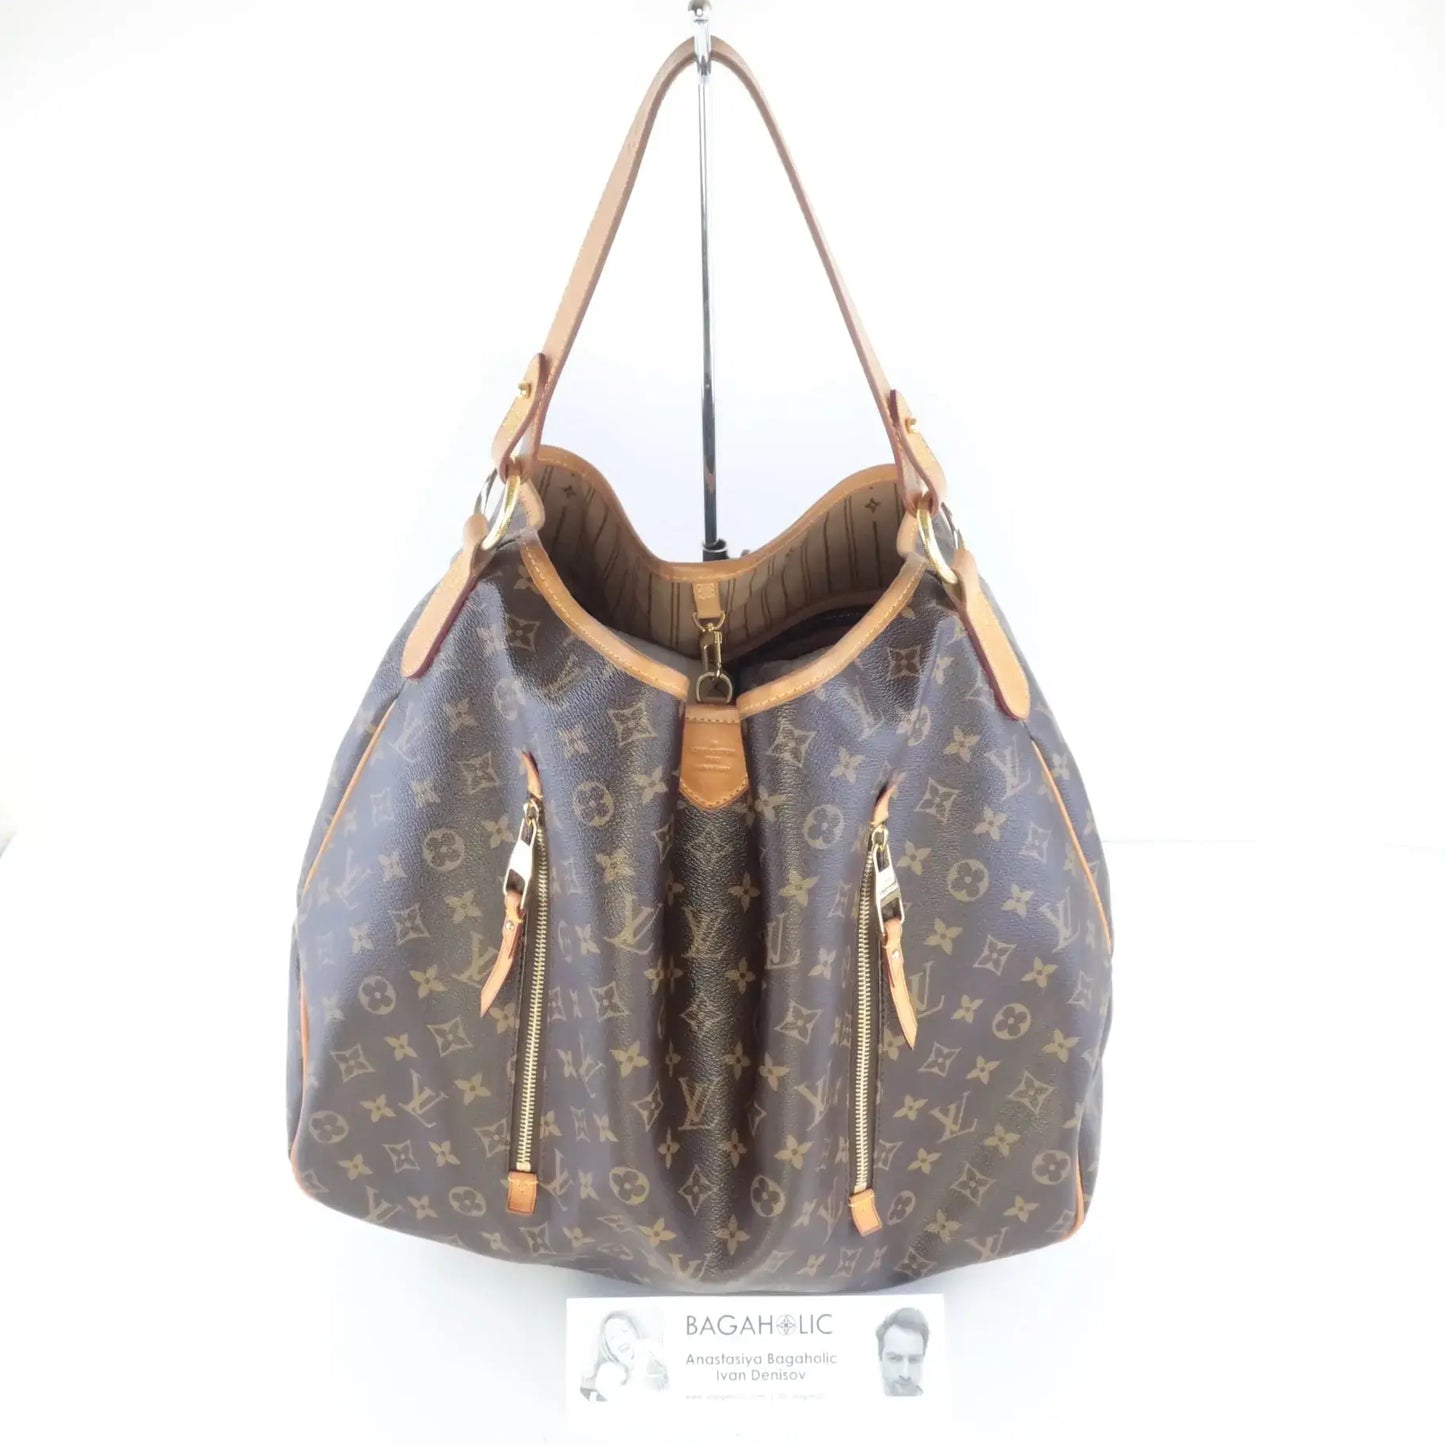 Load image into Gallery viewer, Louis Vuitton Louis Vuitton Monogram Canvas Delightful GM (with zippers) Shoulder Bag LVBagaholic
